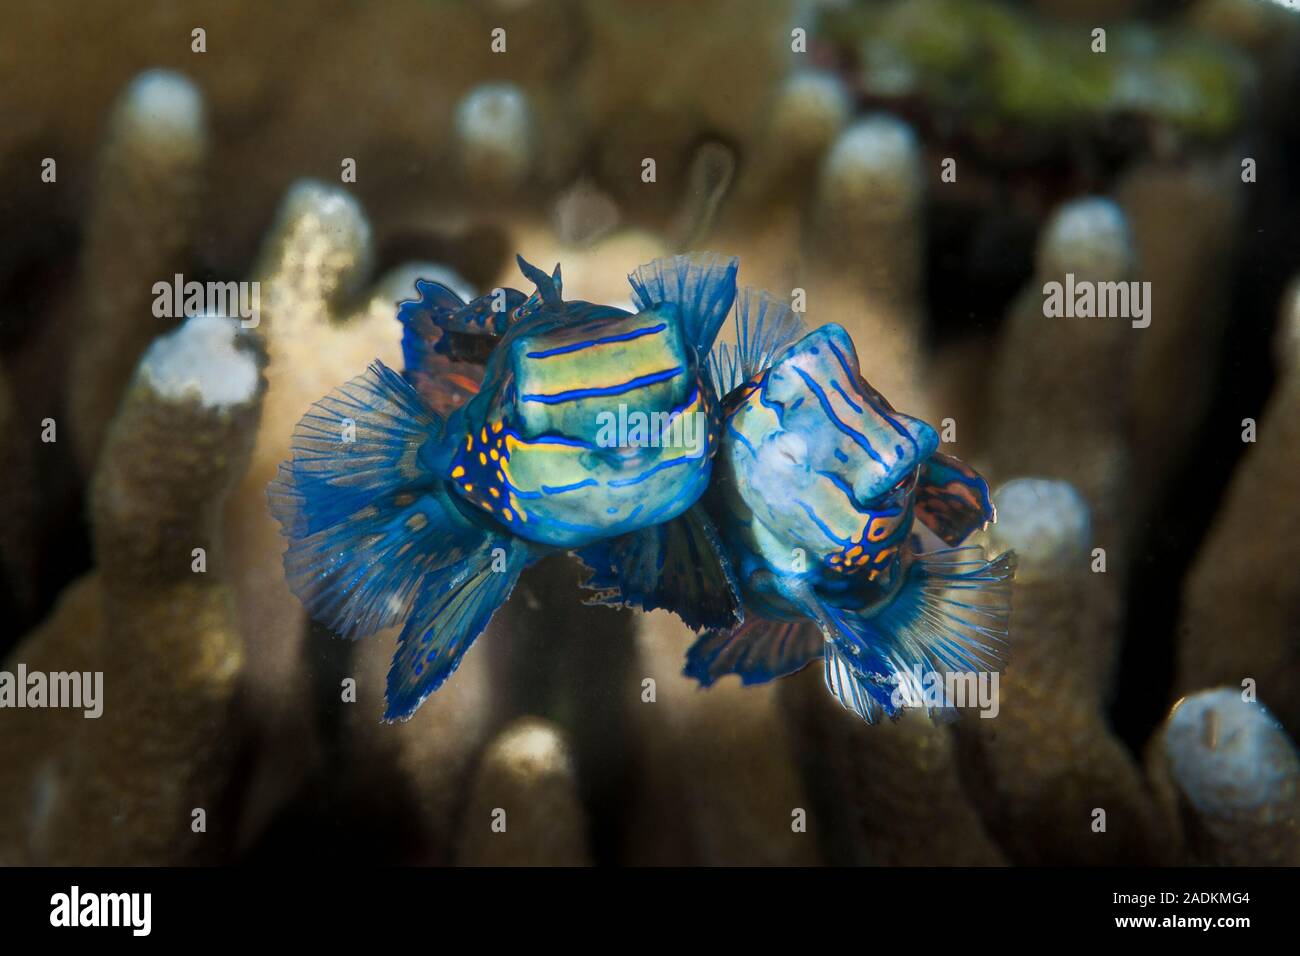 Mandarinfish usually remains hidden inside the coral during the day. Mating 'dances' start at sunset. Stock Photo